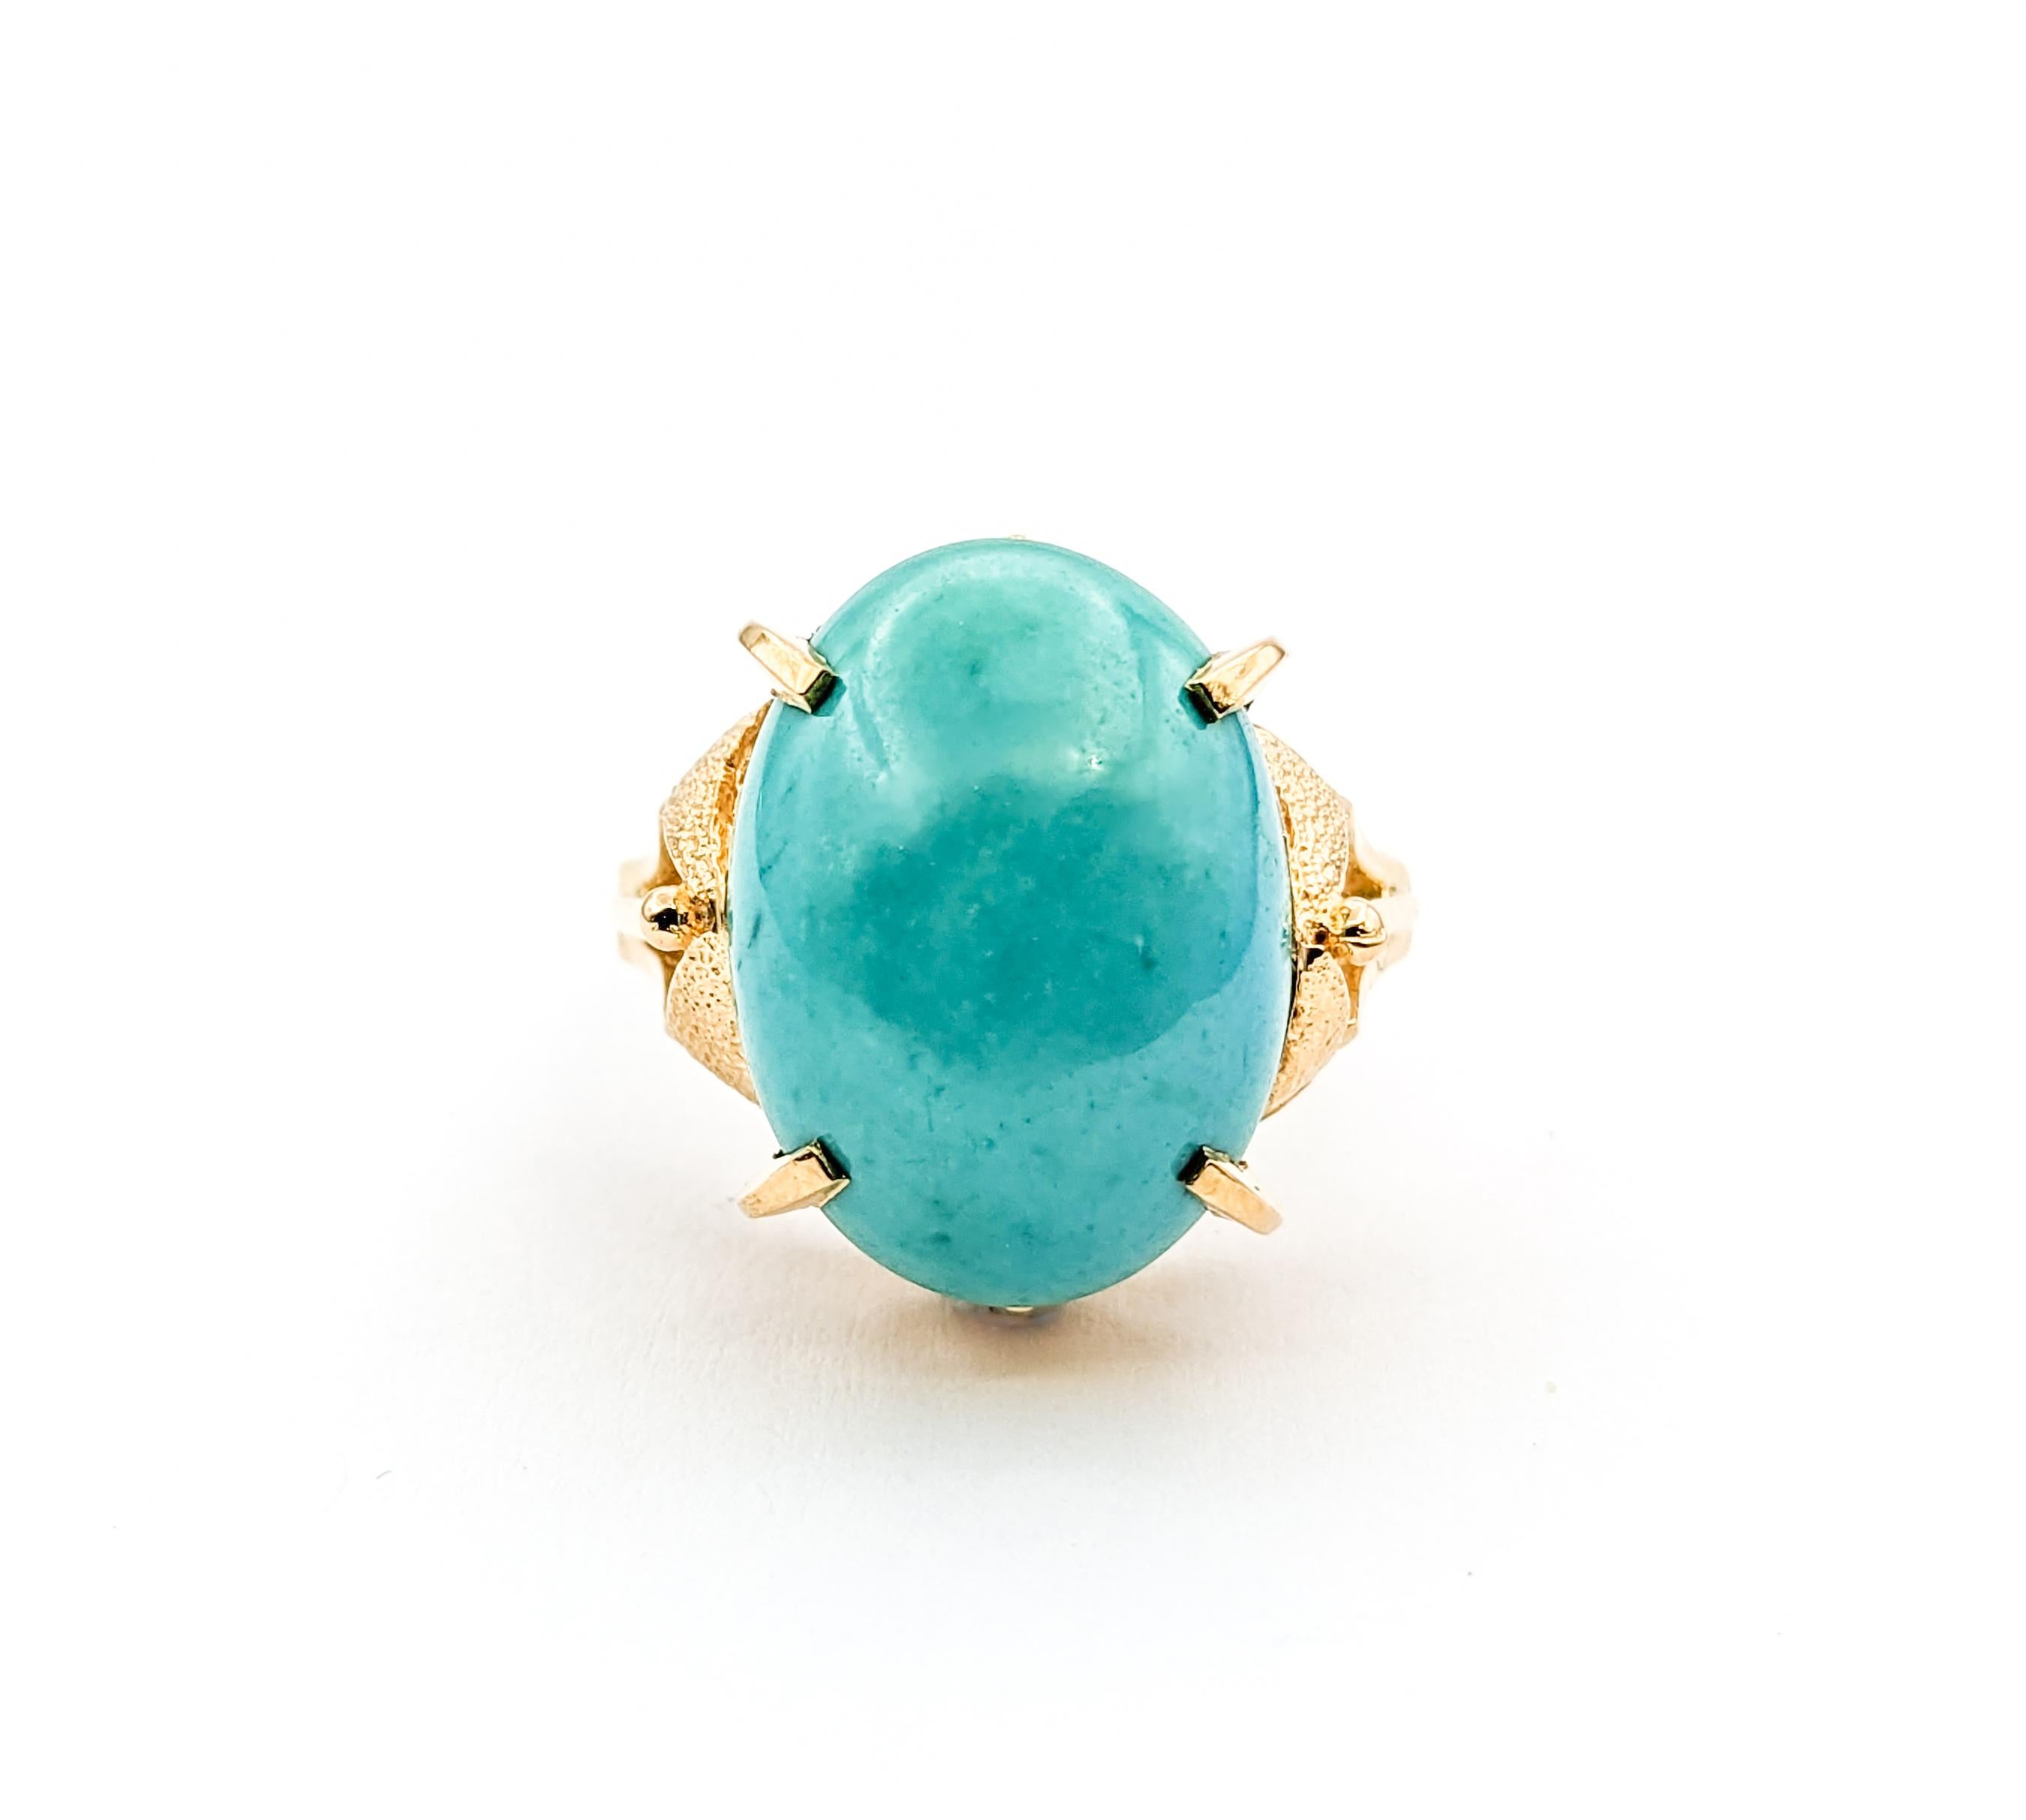 6.50ct Cabochon Turquoise In Yellow Gold

Discover the charm of our Gemstone Fashion Ring, beautifully crafted in 18kt yellow gold. This ring features a stunning centerpiece: a 6.50ct cabochon turquoise, showcasing the vibrant and unique beauty of